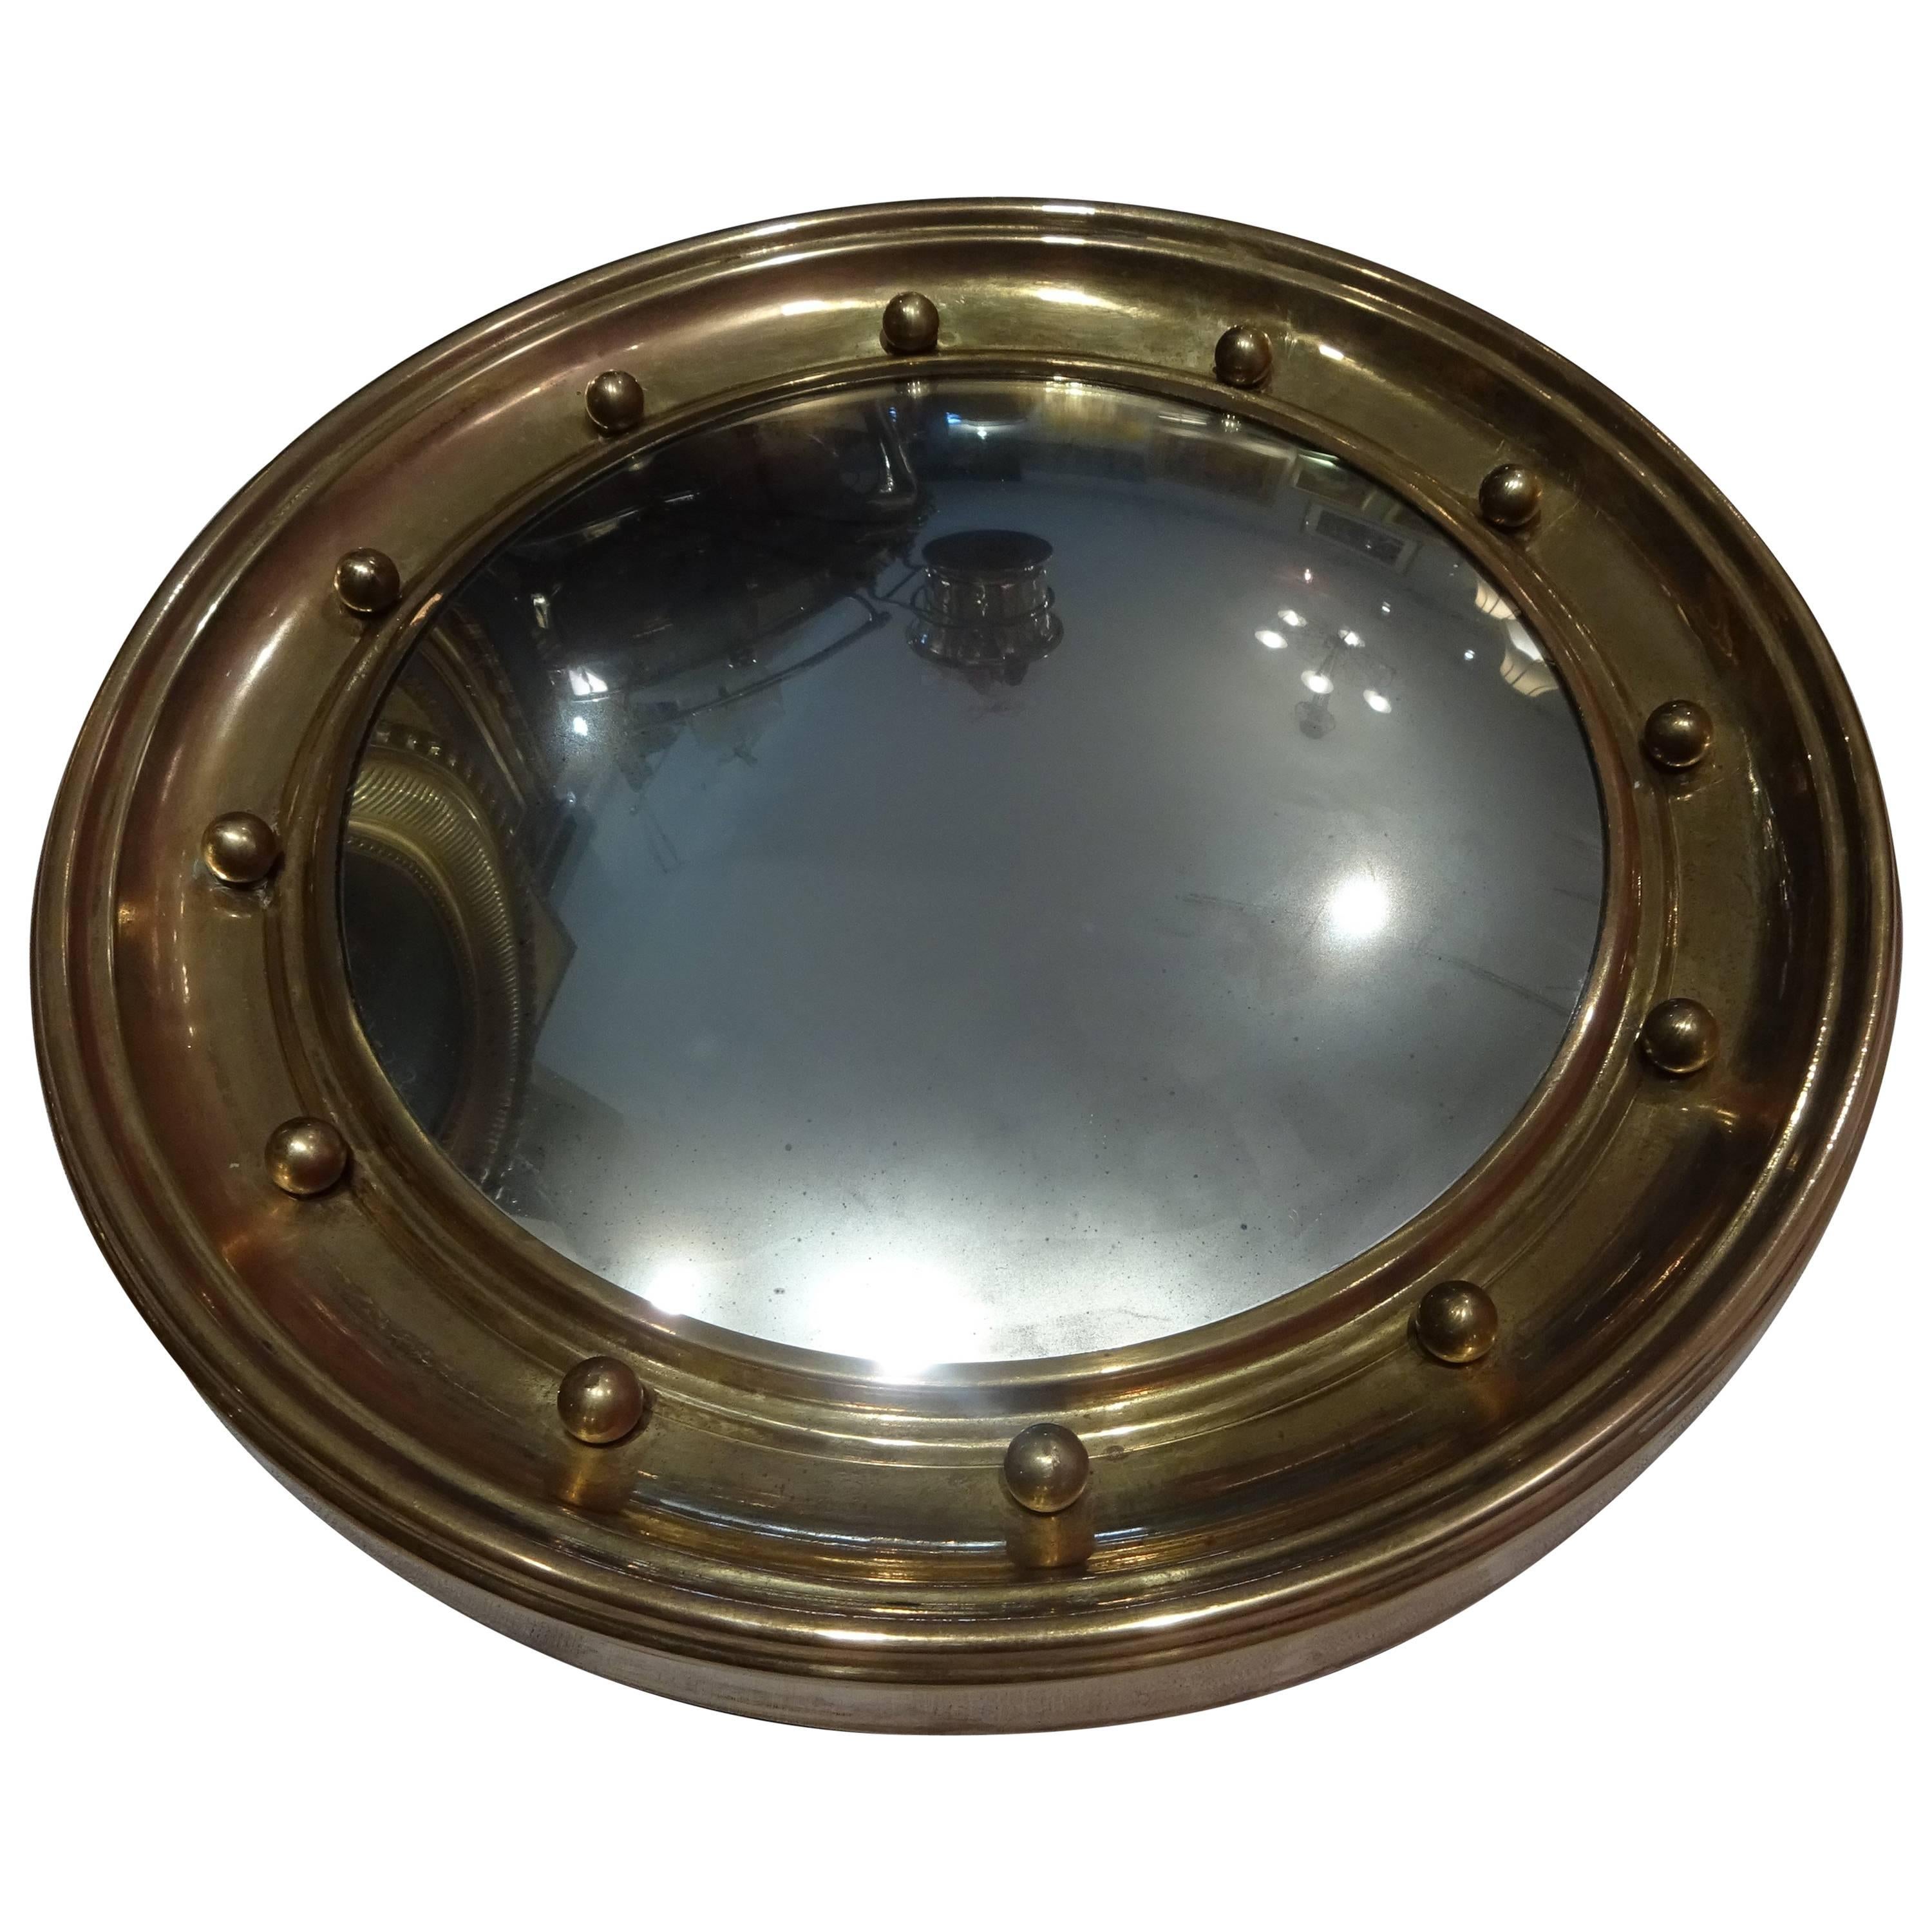 Federal style mirror.
12 fully round balls on molding.
Measures: Diameter 17".
Molding is 2.5" large and 1.5" thick.
Mirror very slightly blurry. Pleasantly witnessing the old age of that mirror. 
Back made of sturdy wood